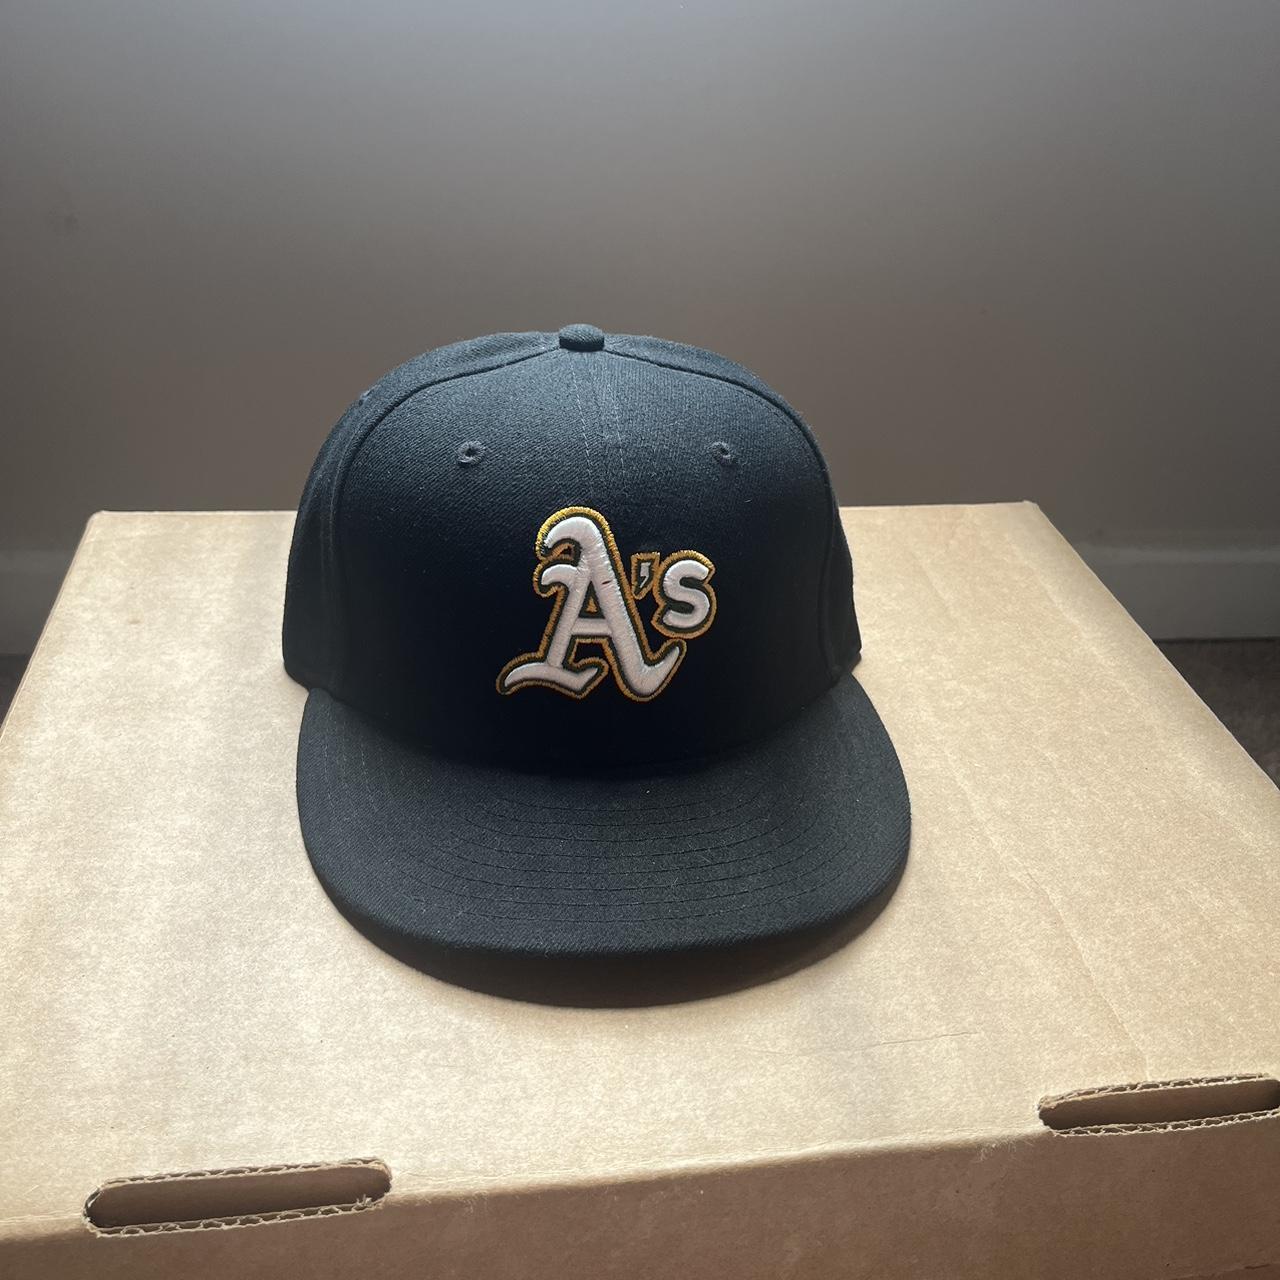 New Era Fitted Hat Size: 7 #newera #fitted #hat... - Depop